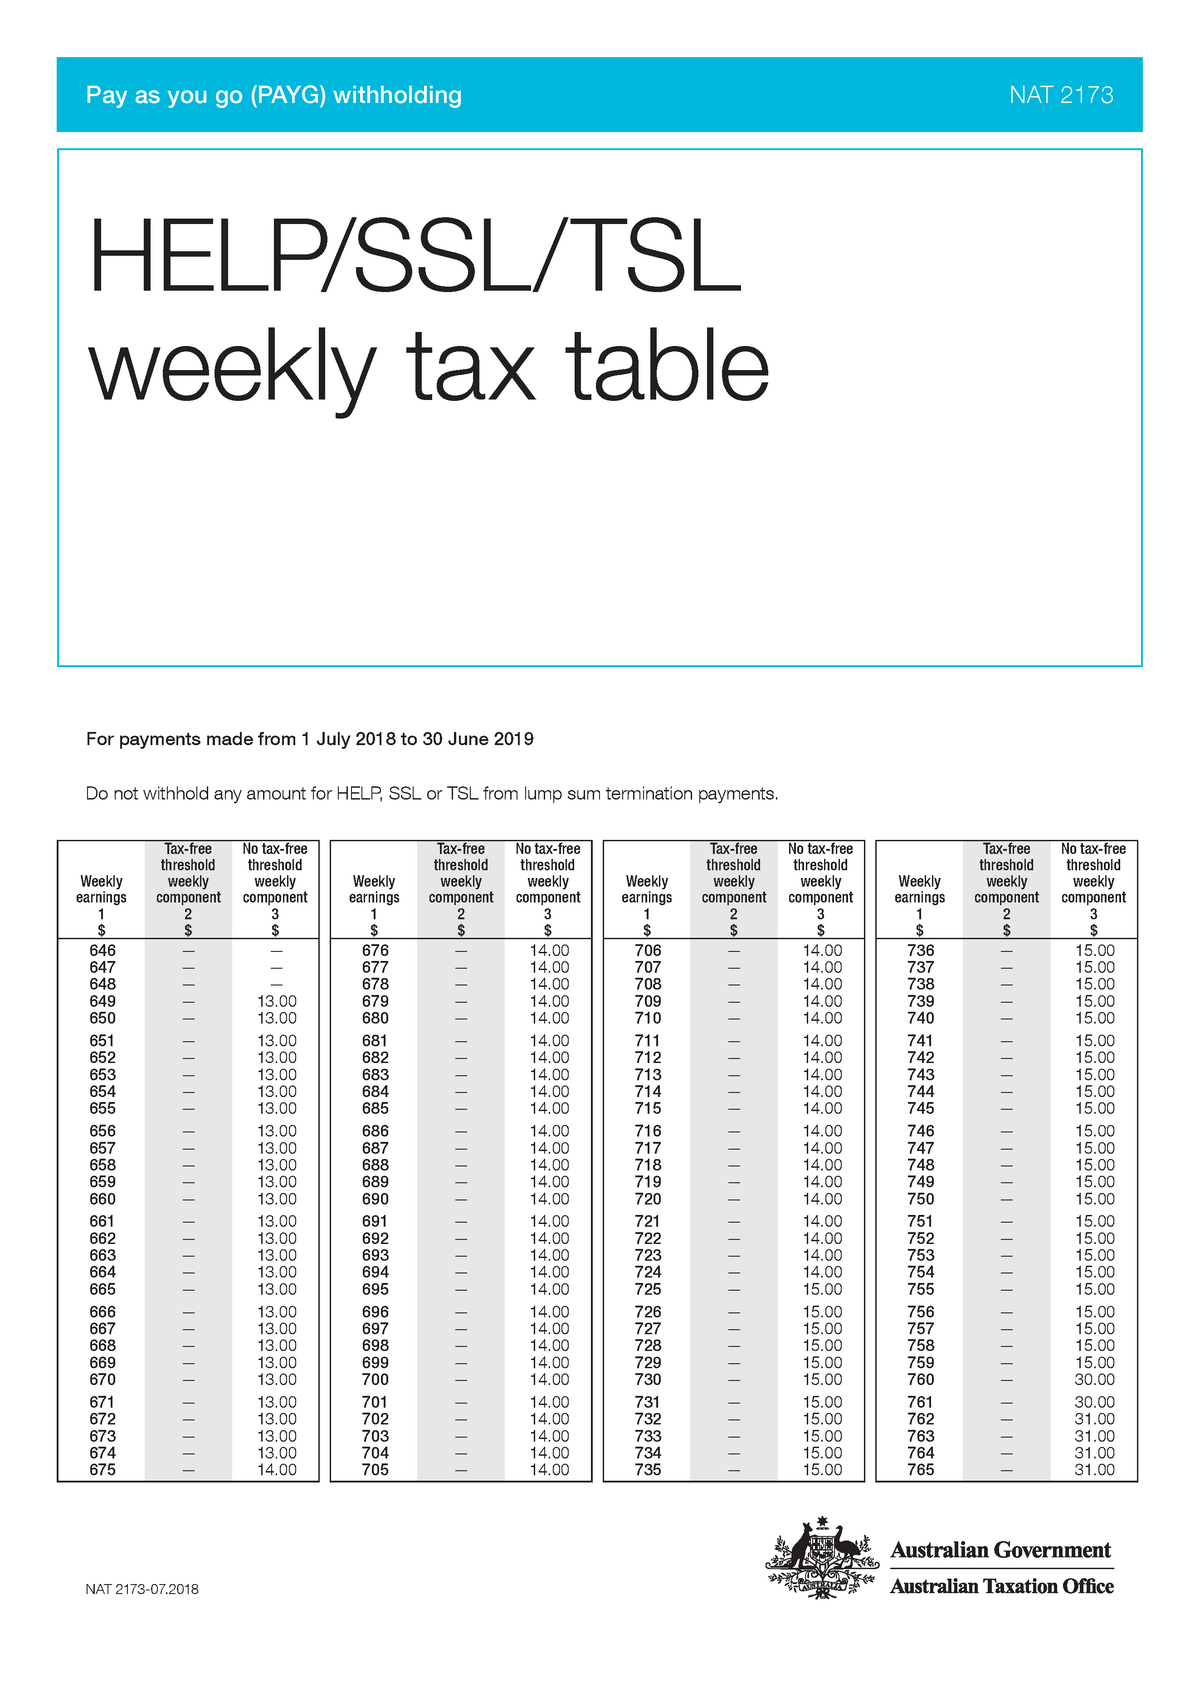 help-ssl-tsl-weekly-tax-table-2018-19-nat-2173-pay-as-you-go-payg